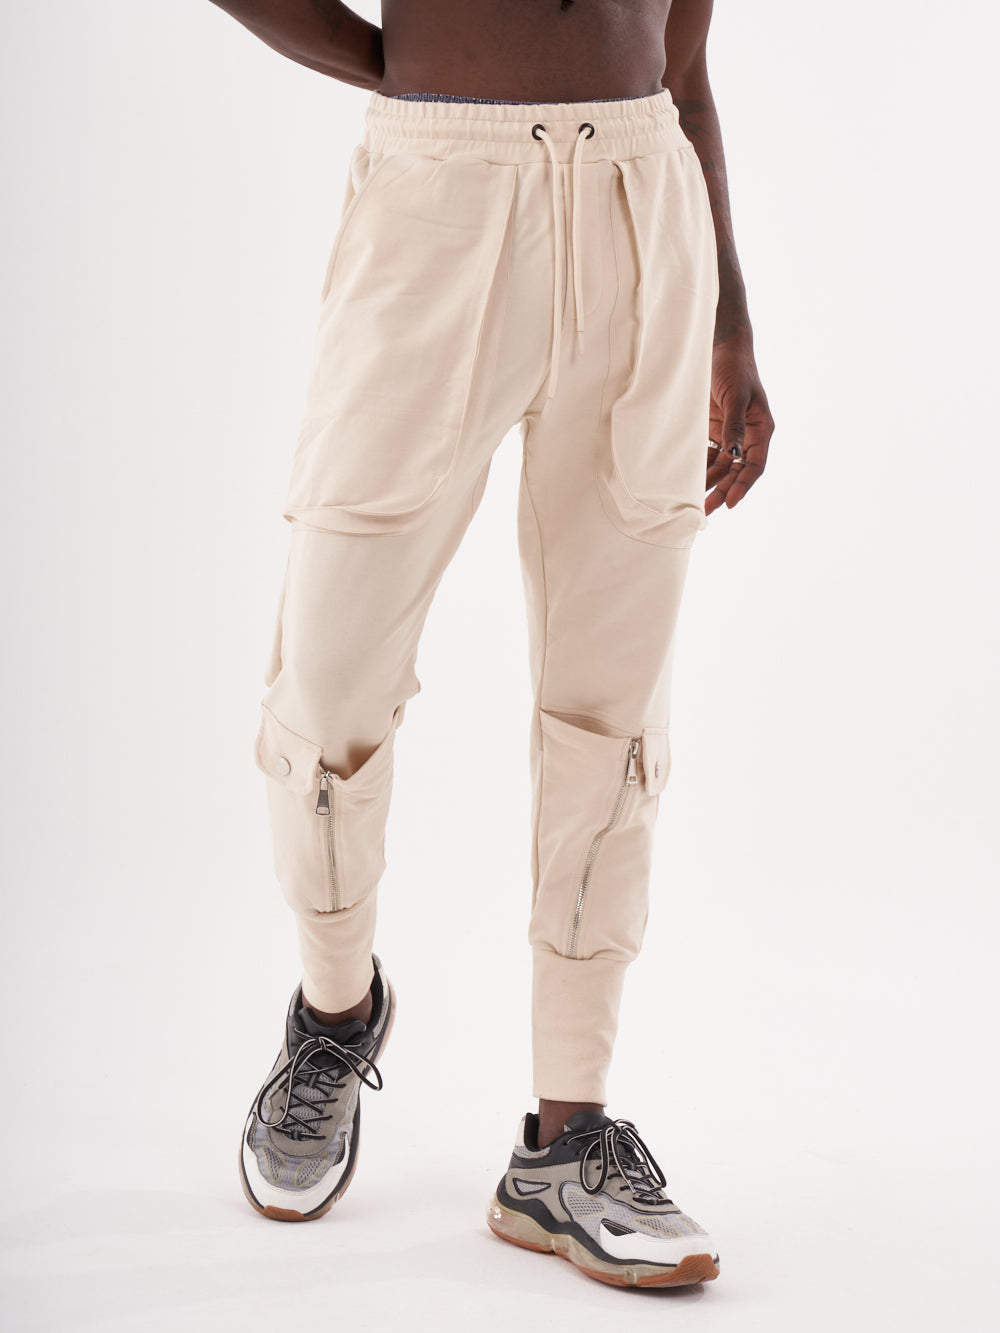 A man wearing GUERRILLA | BEIGE sweatpants and sneakers.